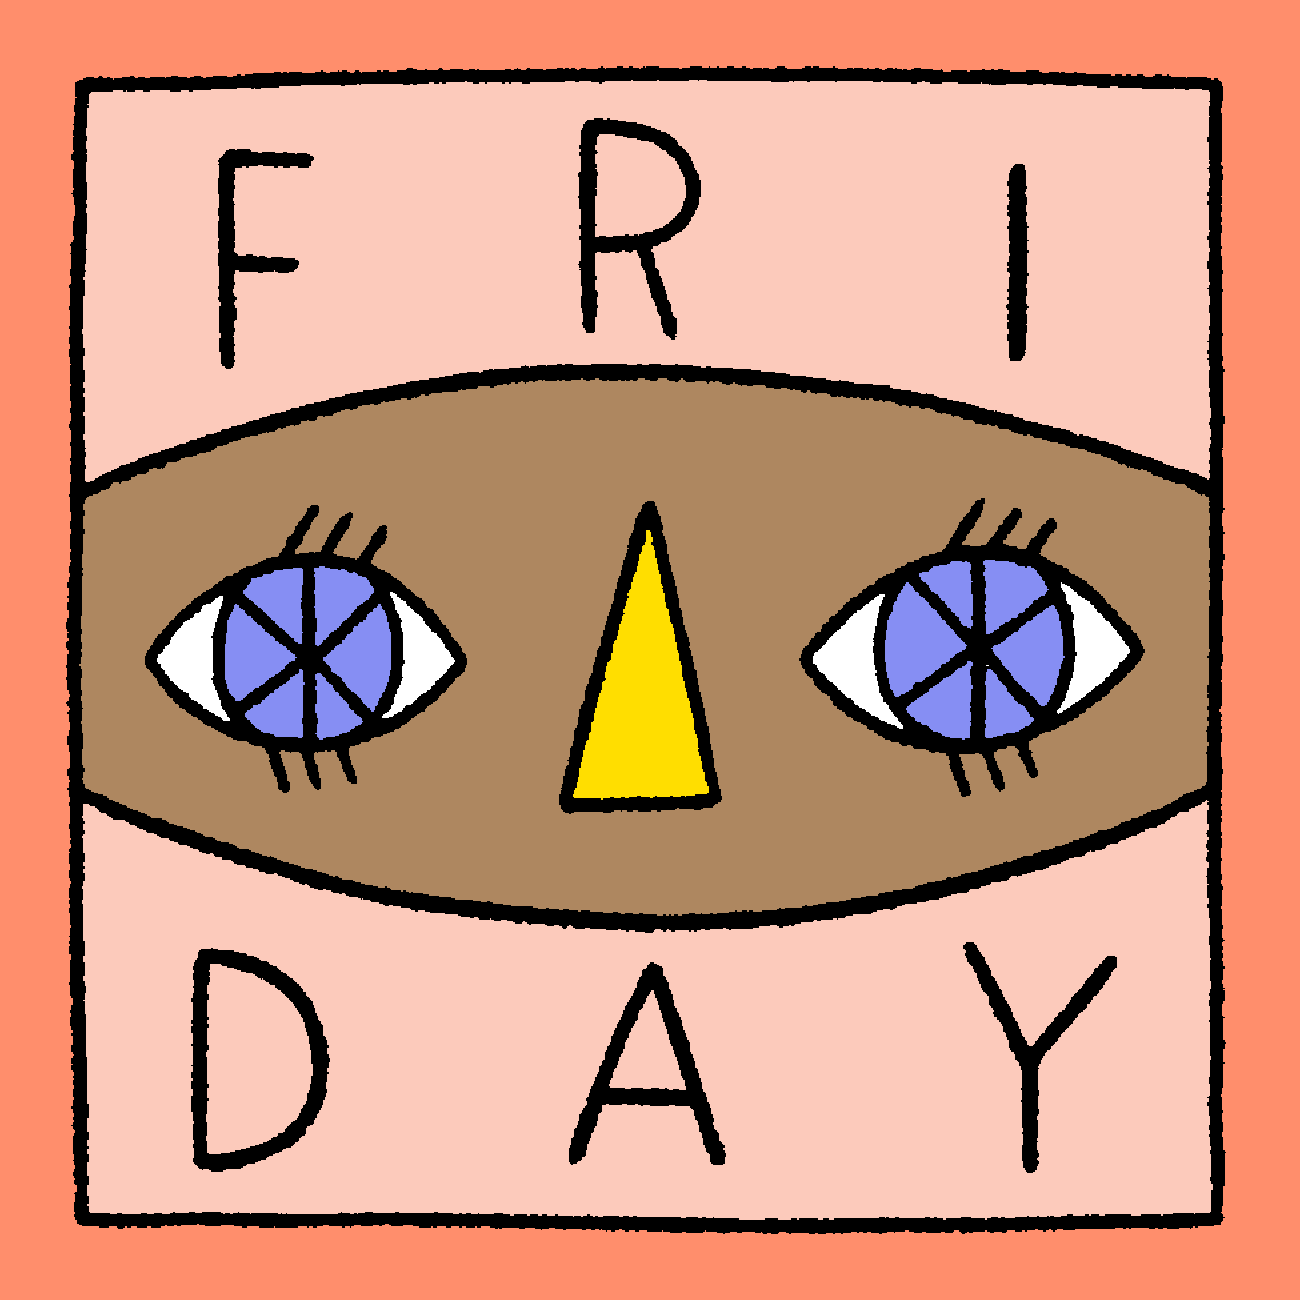 Illustrated gif. A football-shaped head with spinning blue eyes and a yellow nose visually interrupts the text, "Friday."